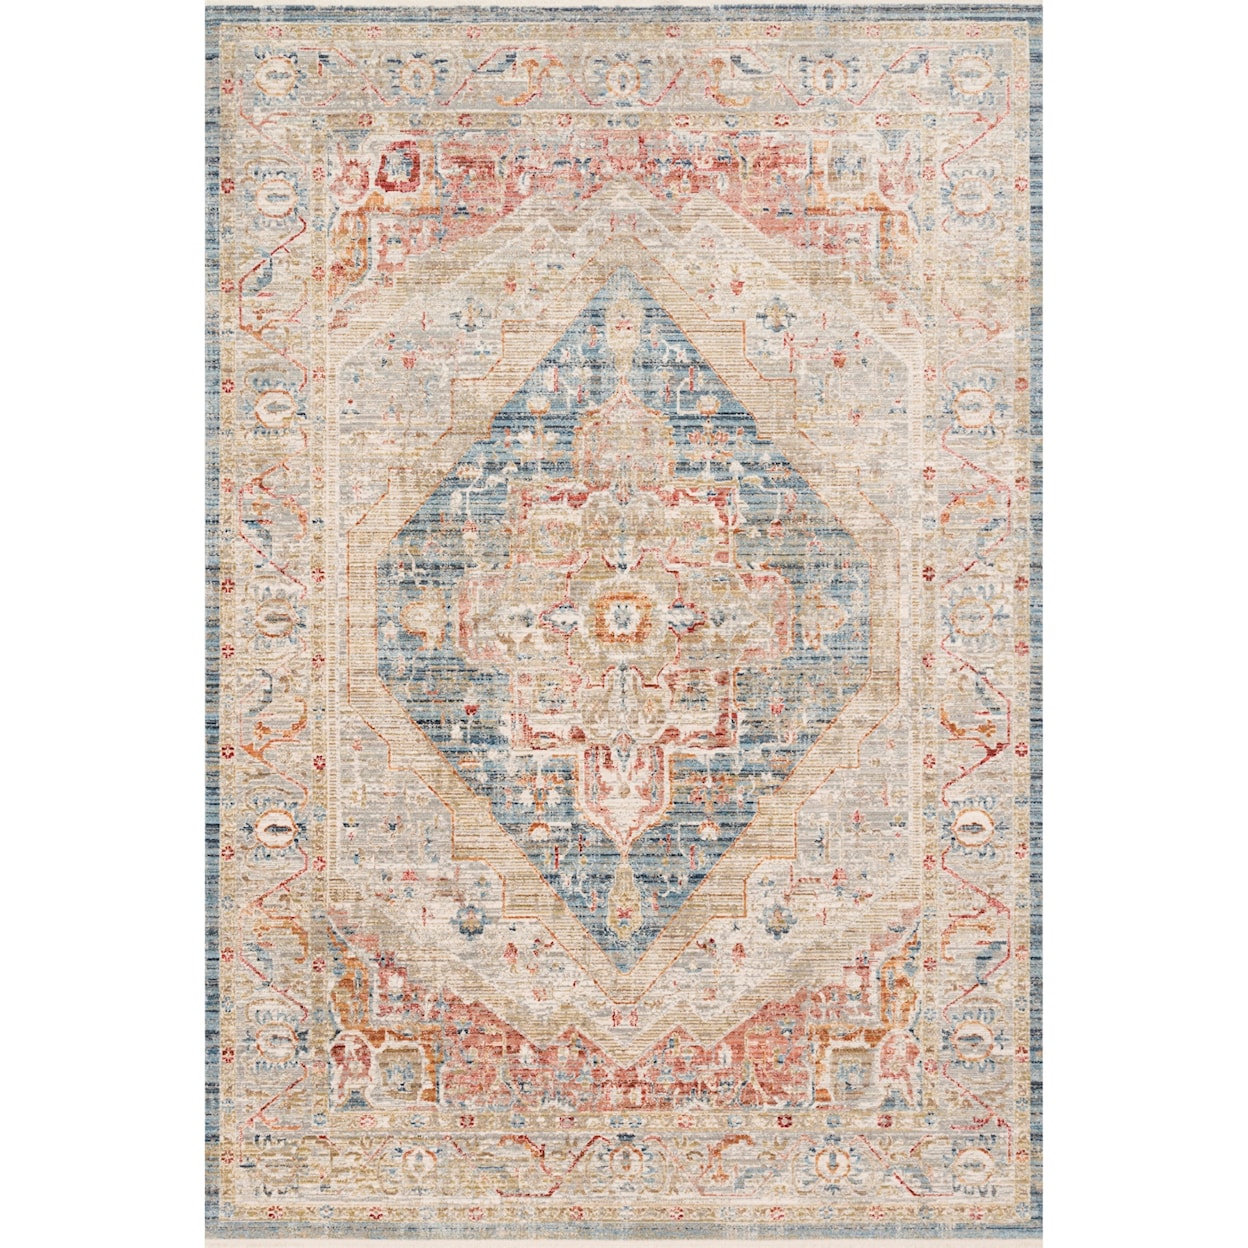 Reeds Rugs Claire 5'3" x 7'9" Blue / Multi Rug